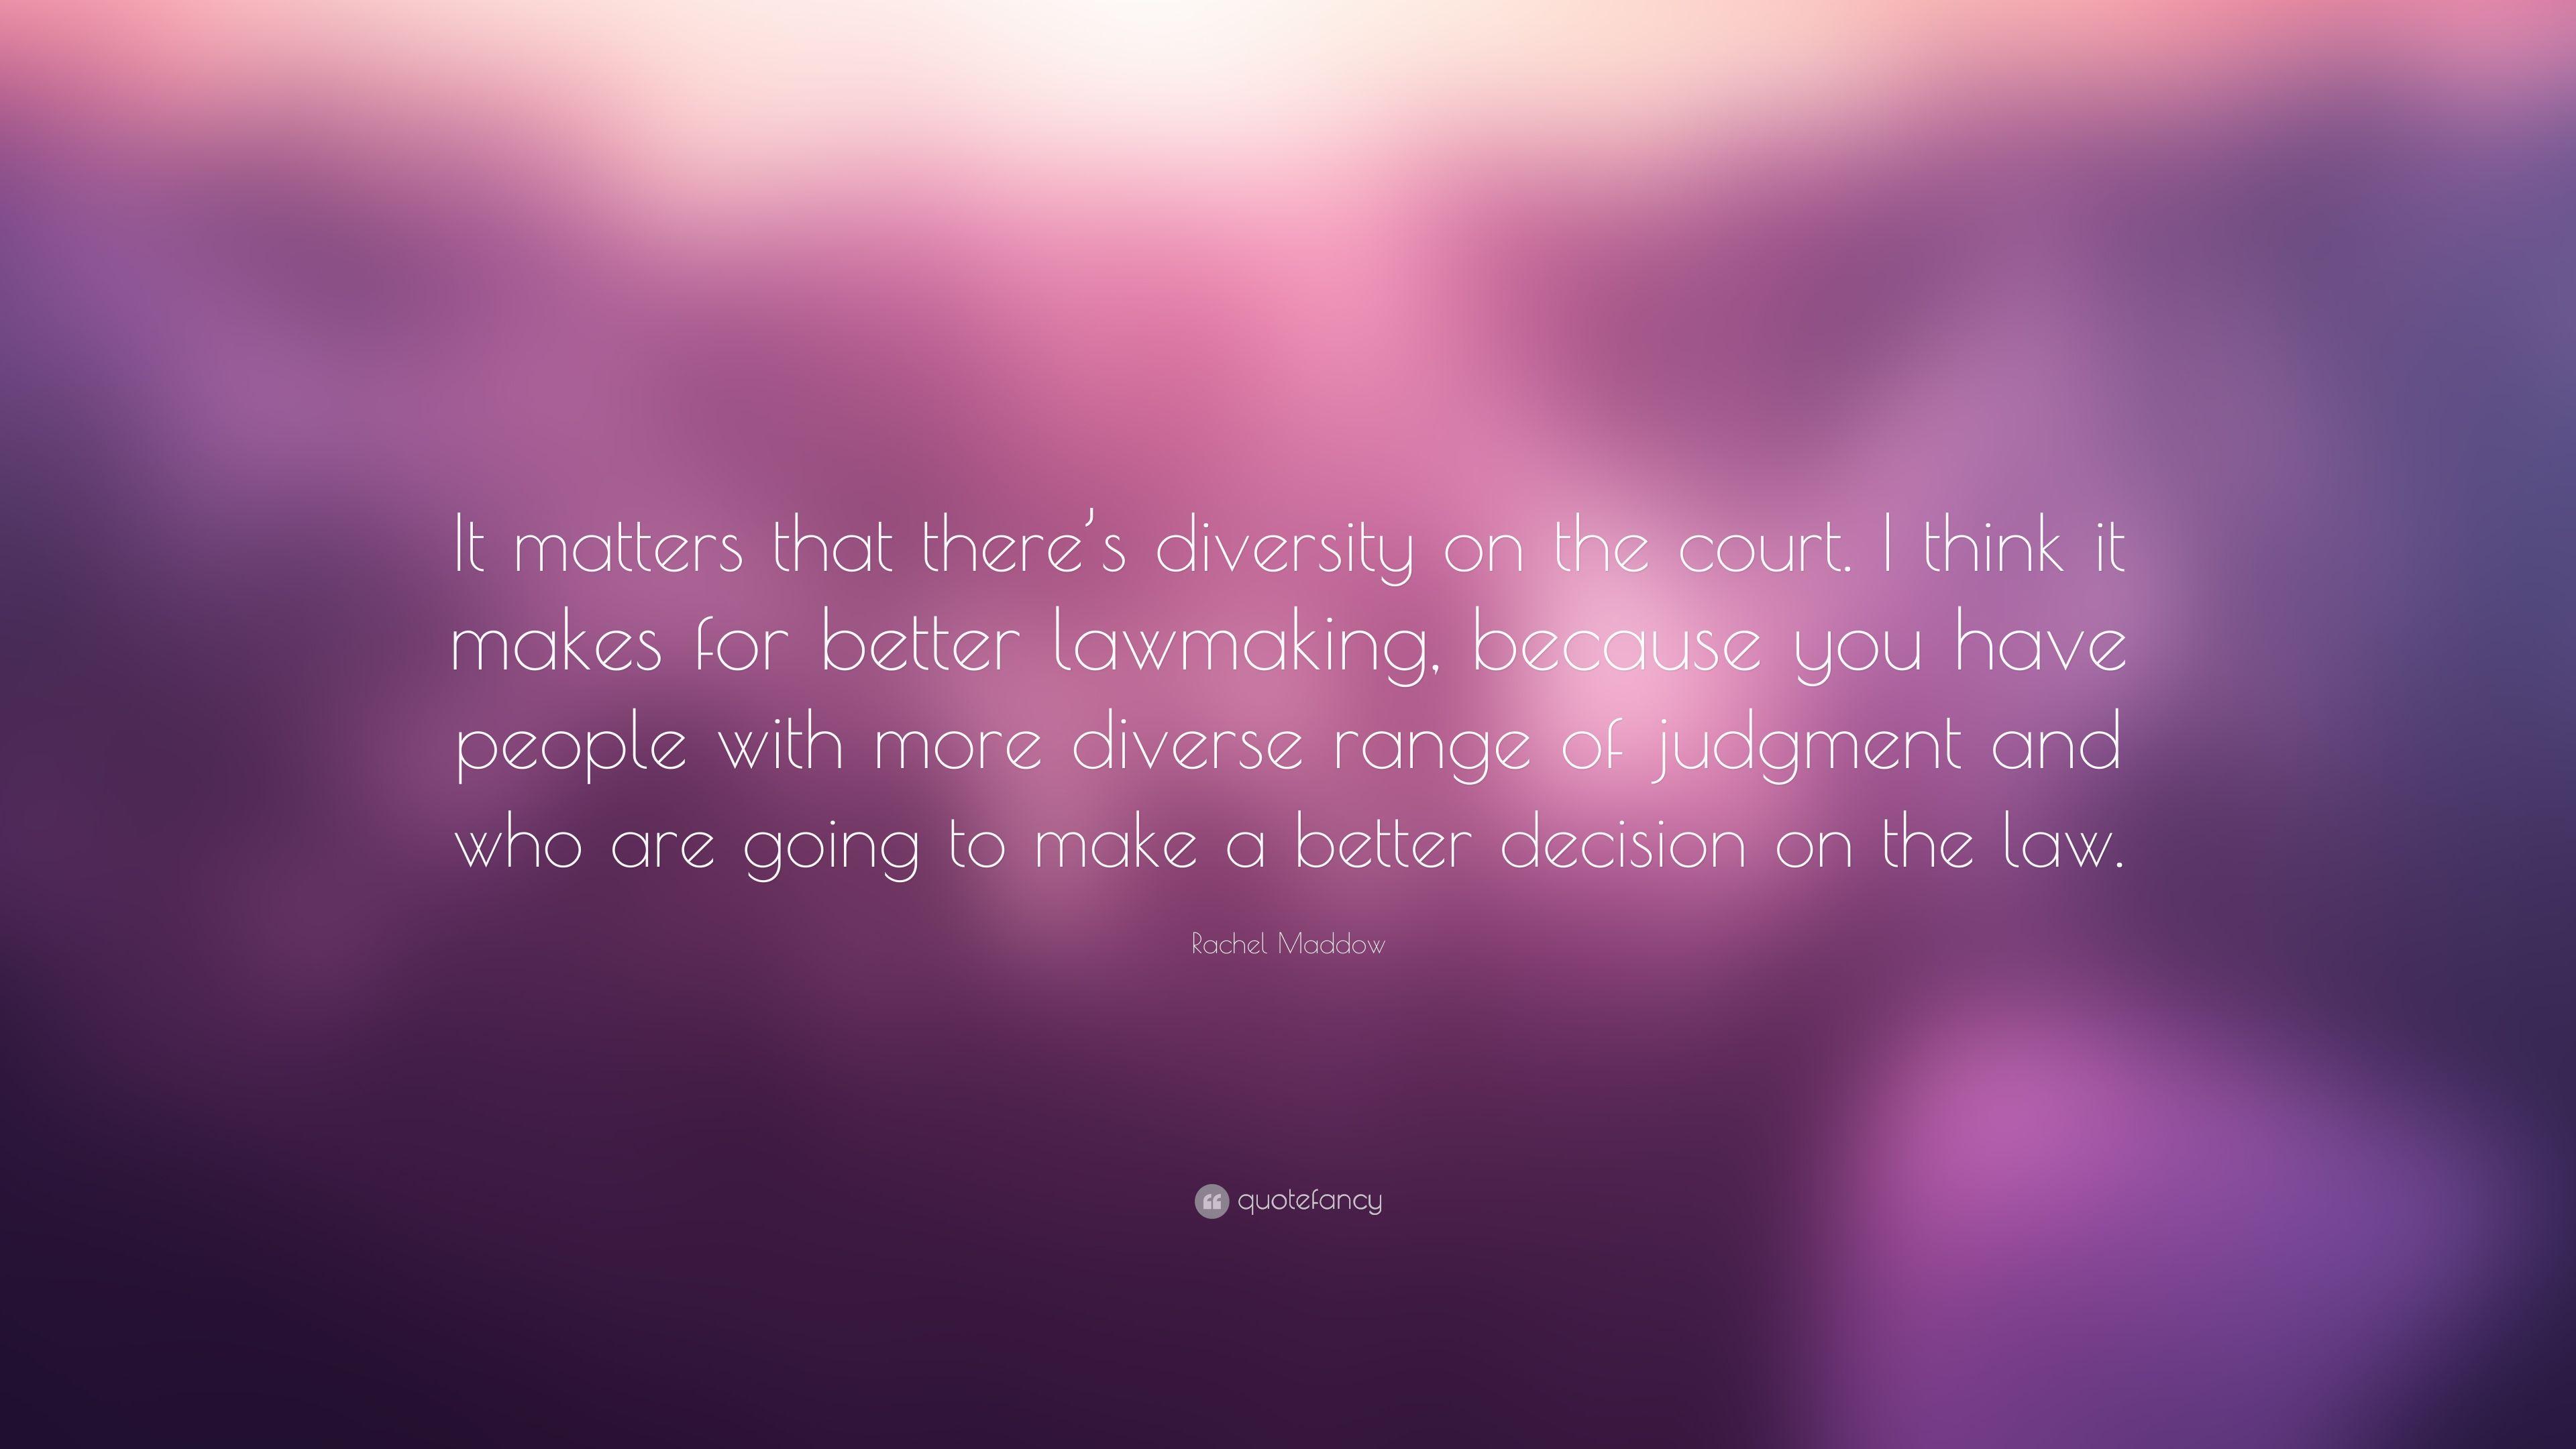 Rachel Maddow Quote: “It matters that there's diversity on the court